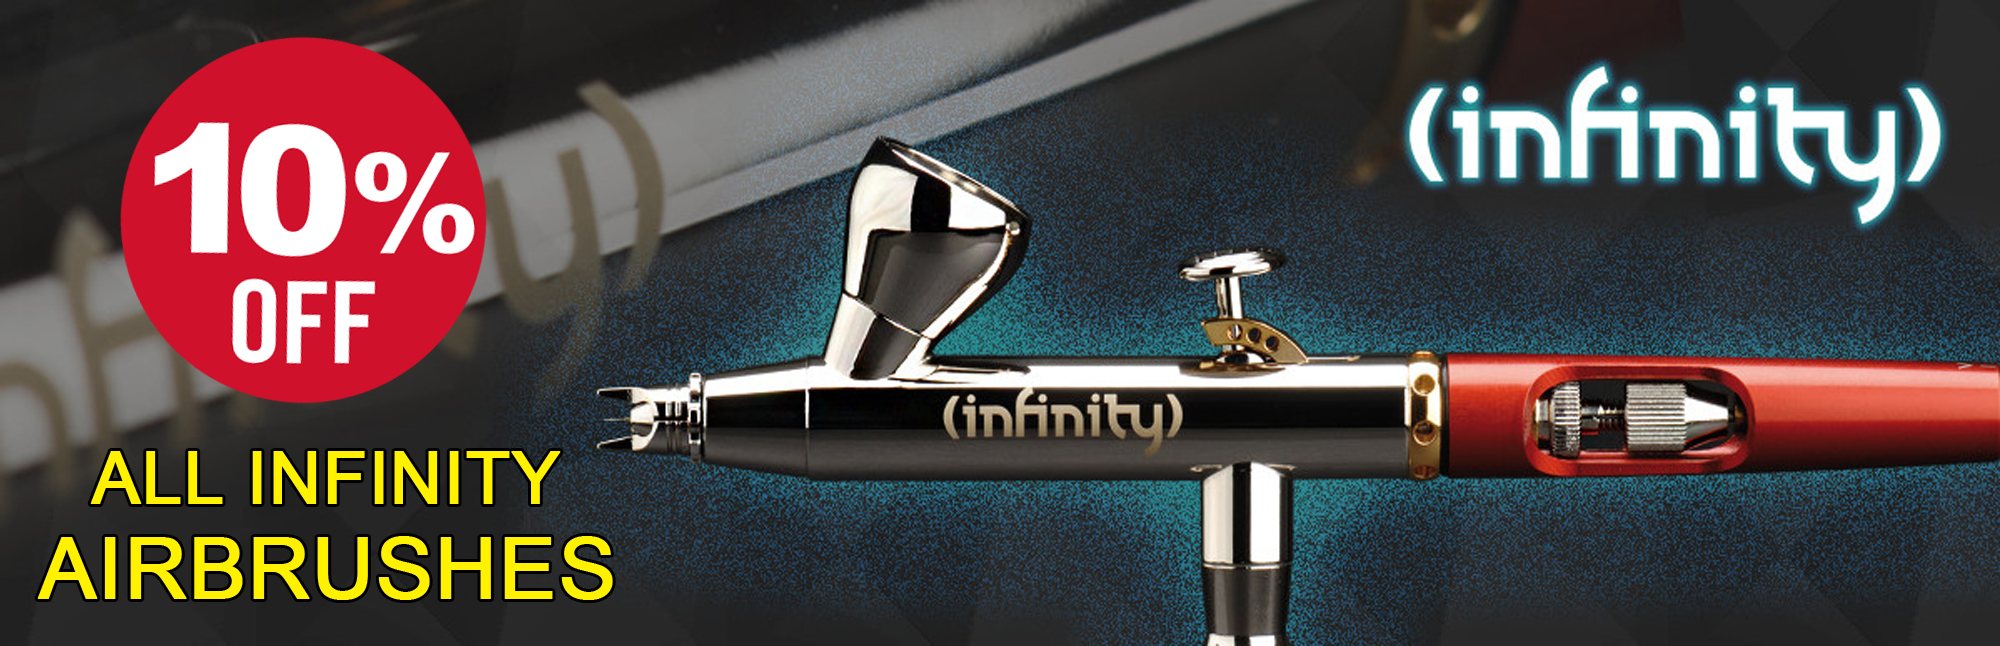 SALE NOW ON ALL INFINITY AIRBRUSHES & KITS